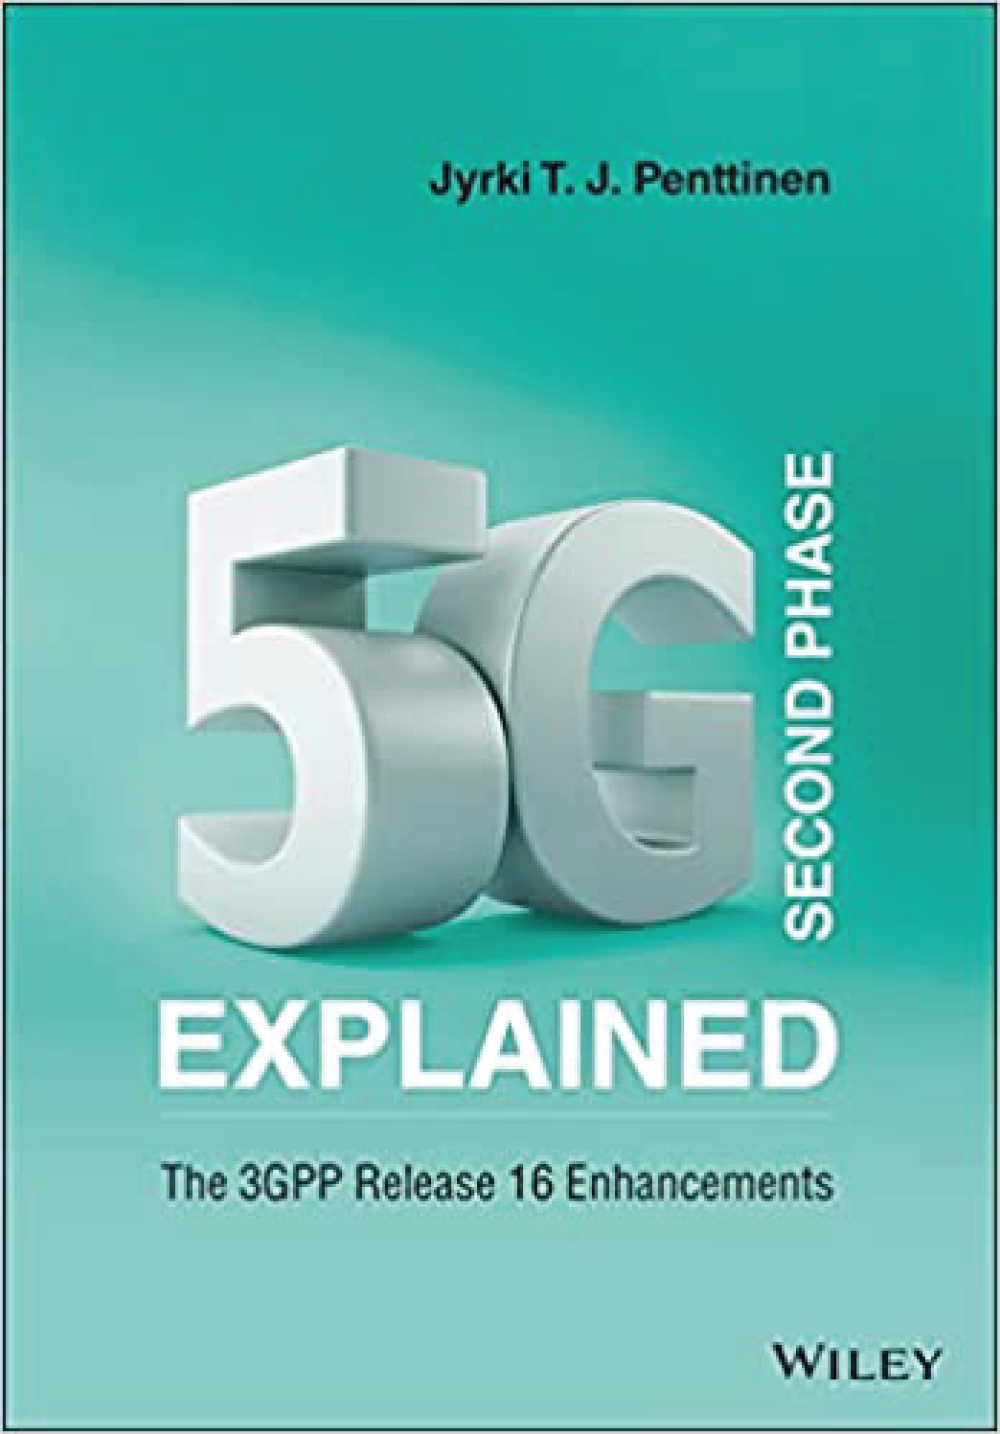 An illustration of 5G second phase.